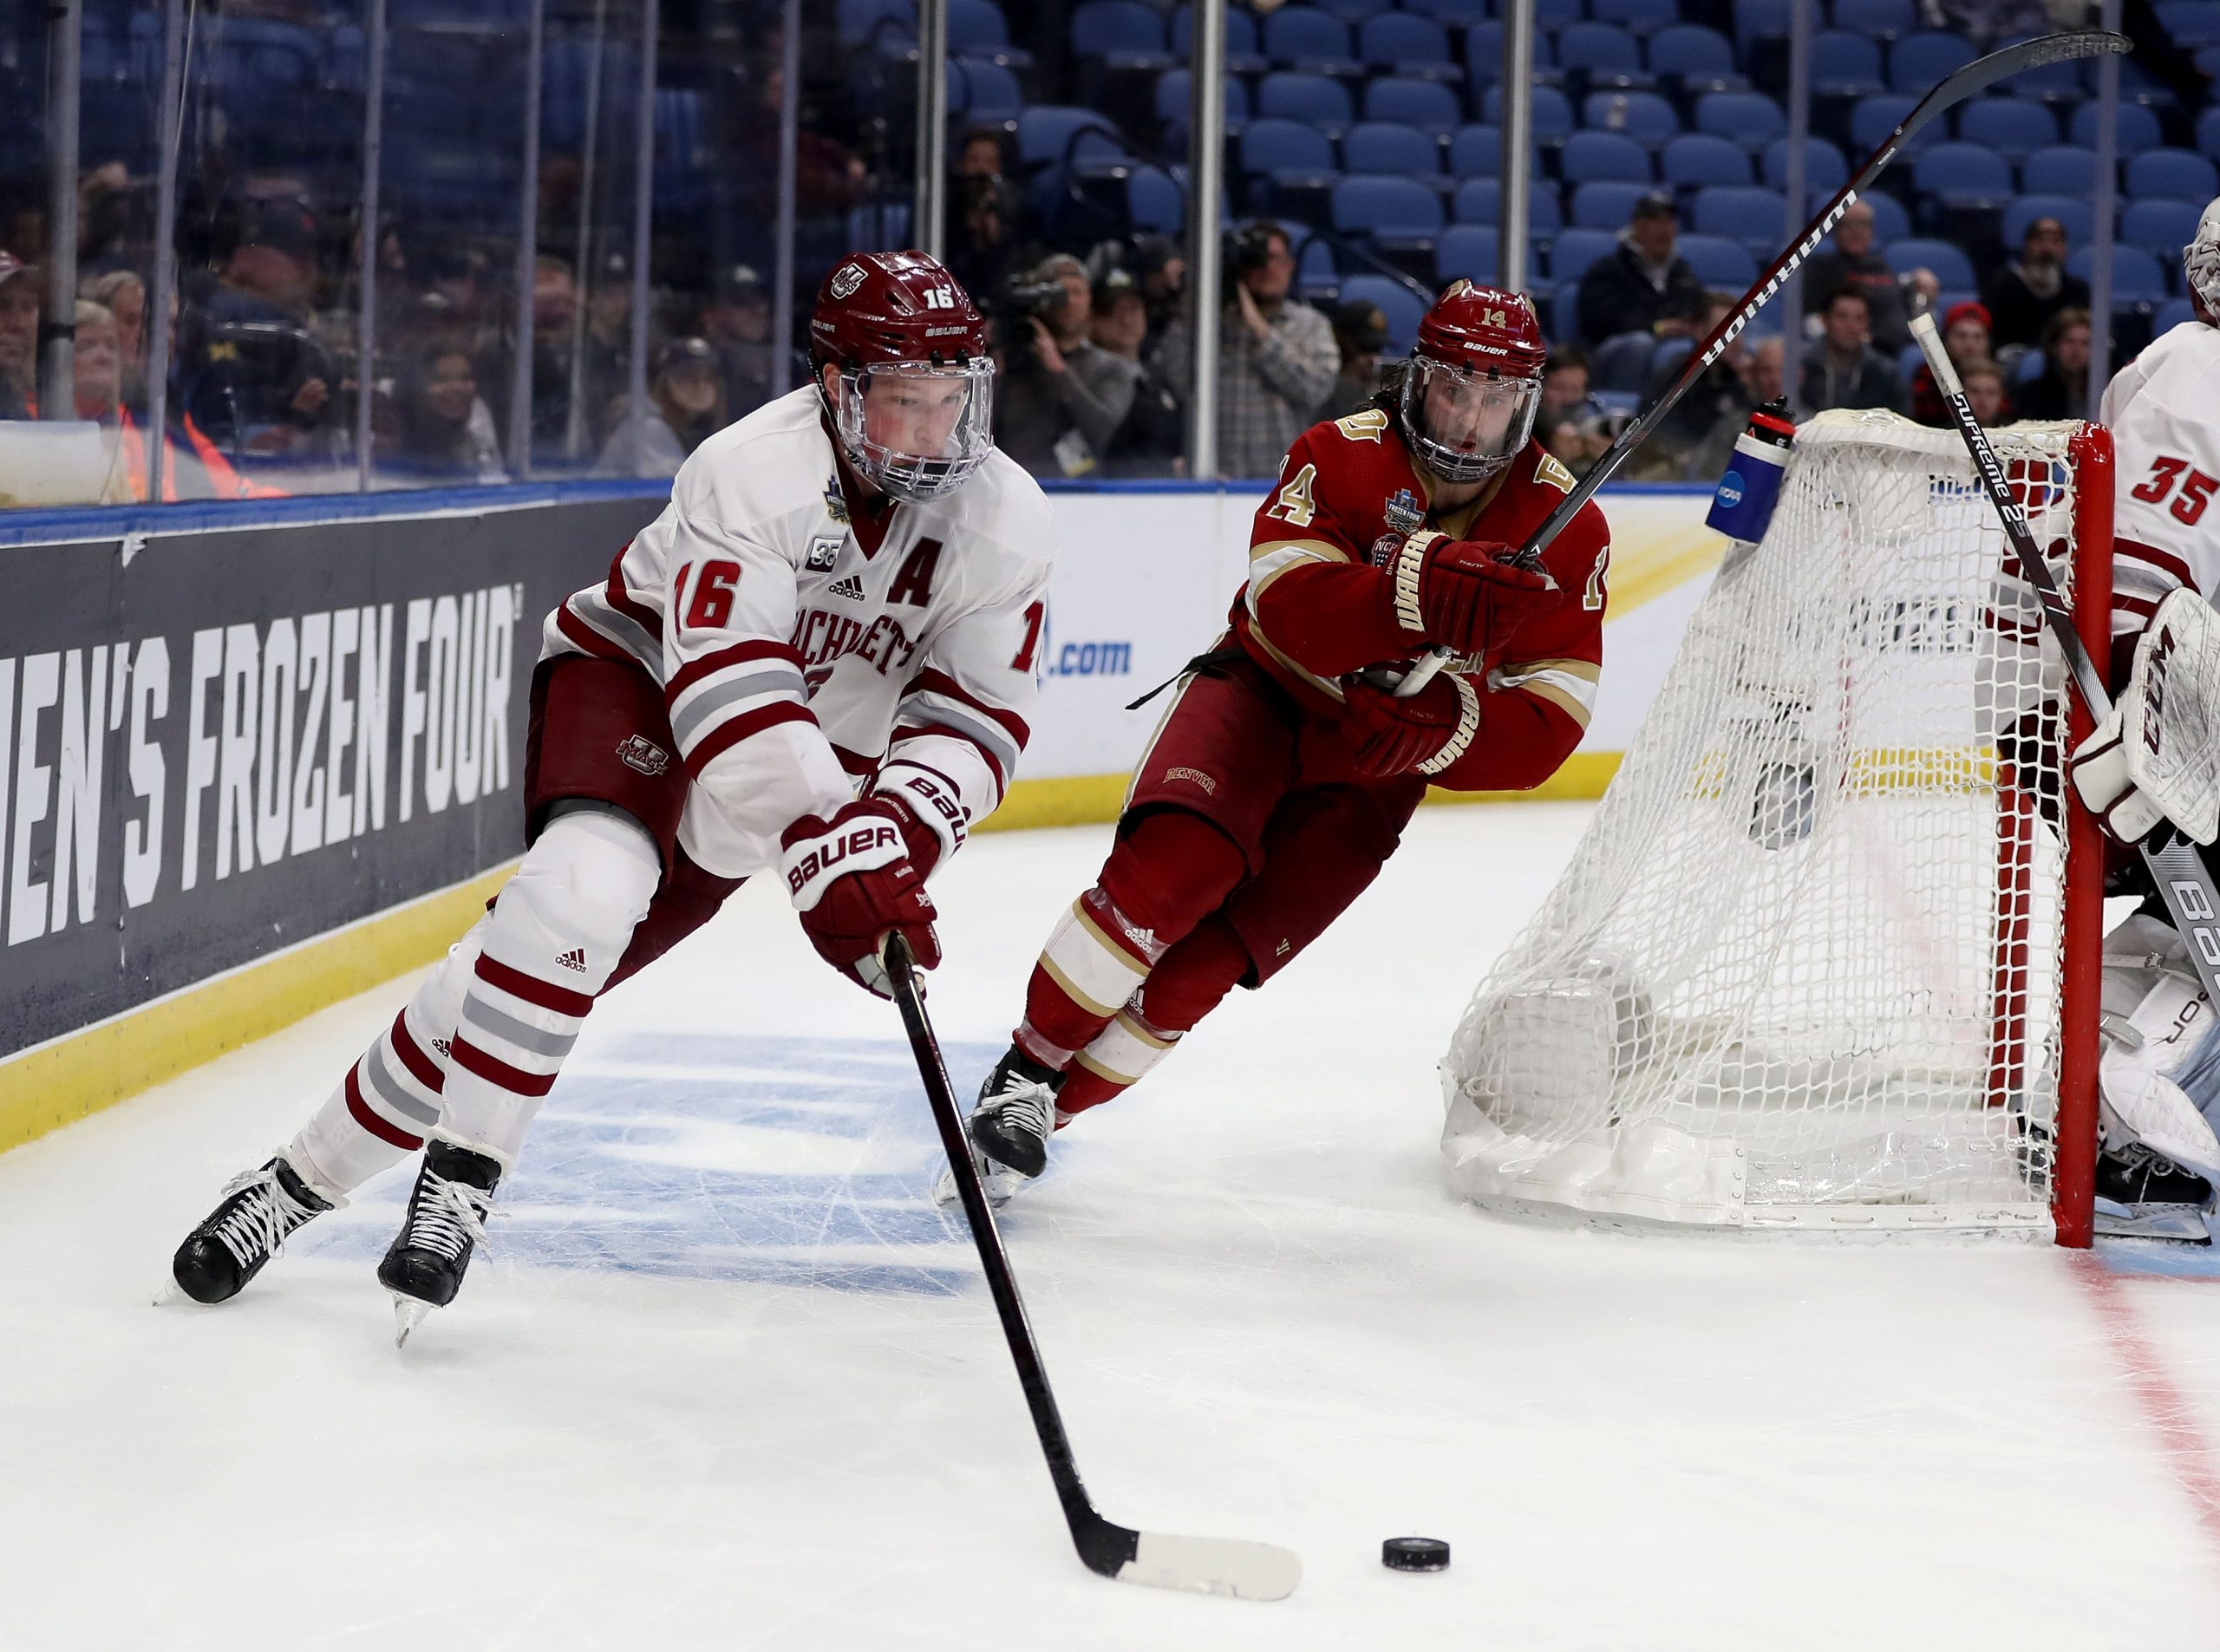 Cale Makar scores in NHL debut just days after playing in NCAA final